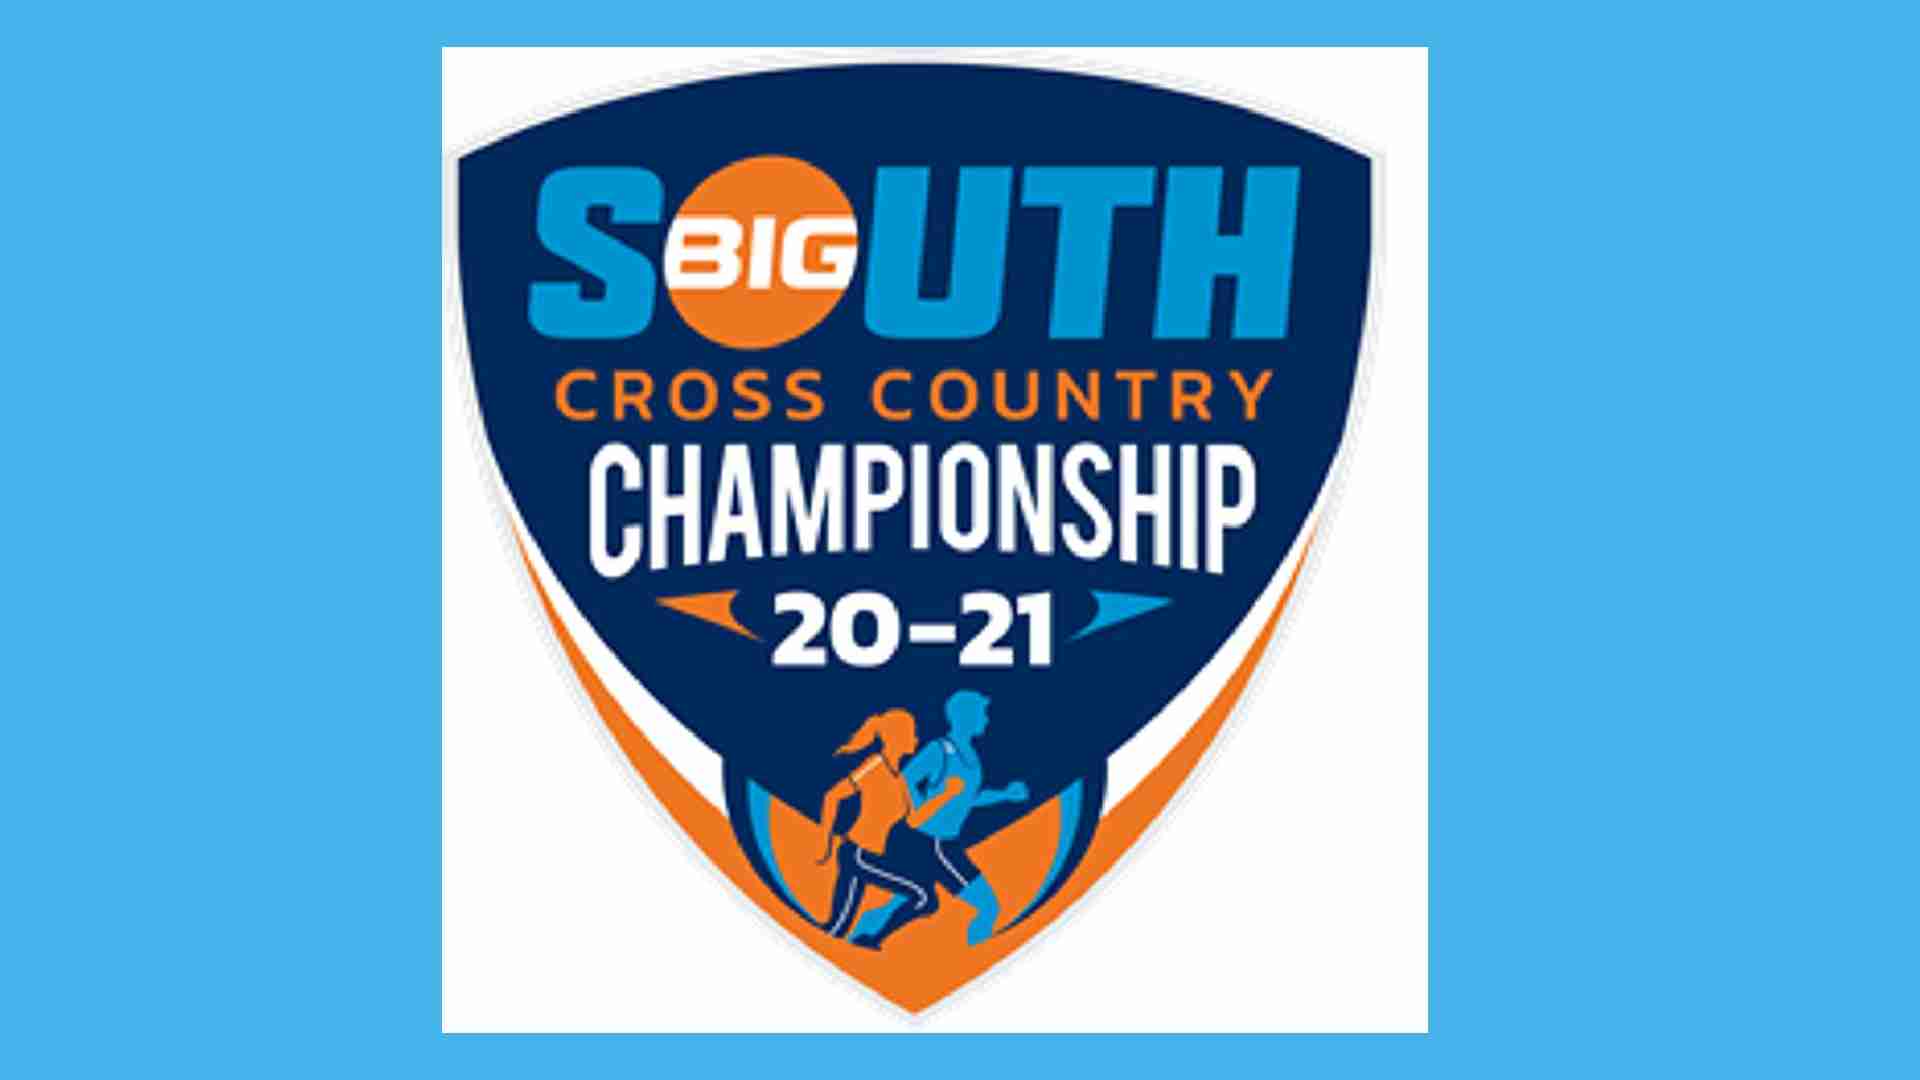 Watch 2020-21 Big South Conference Cross Country Championship